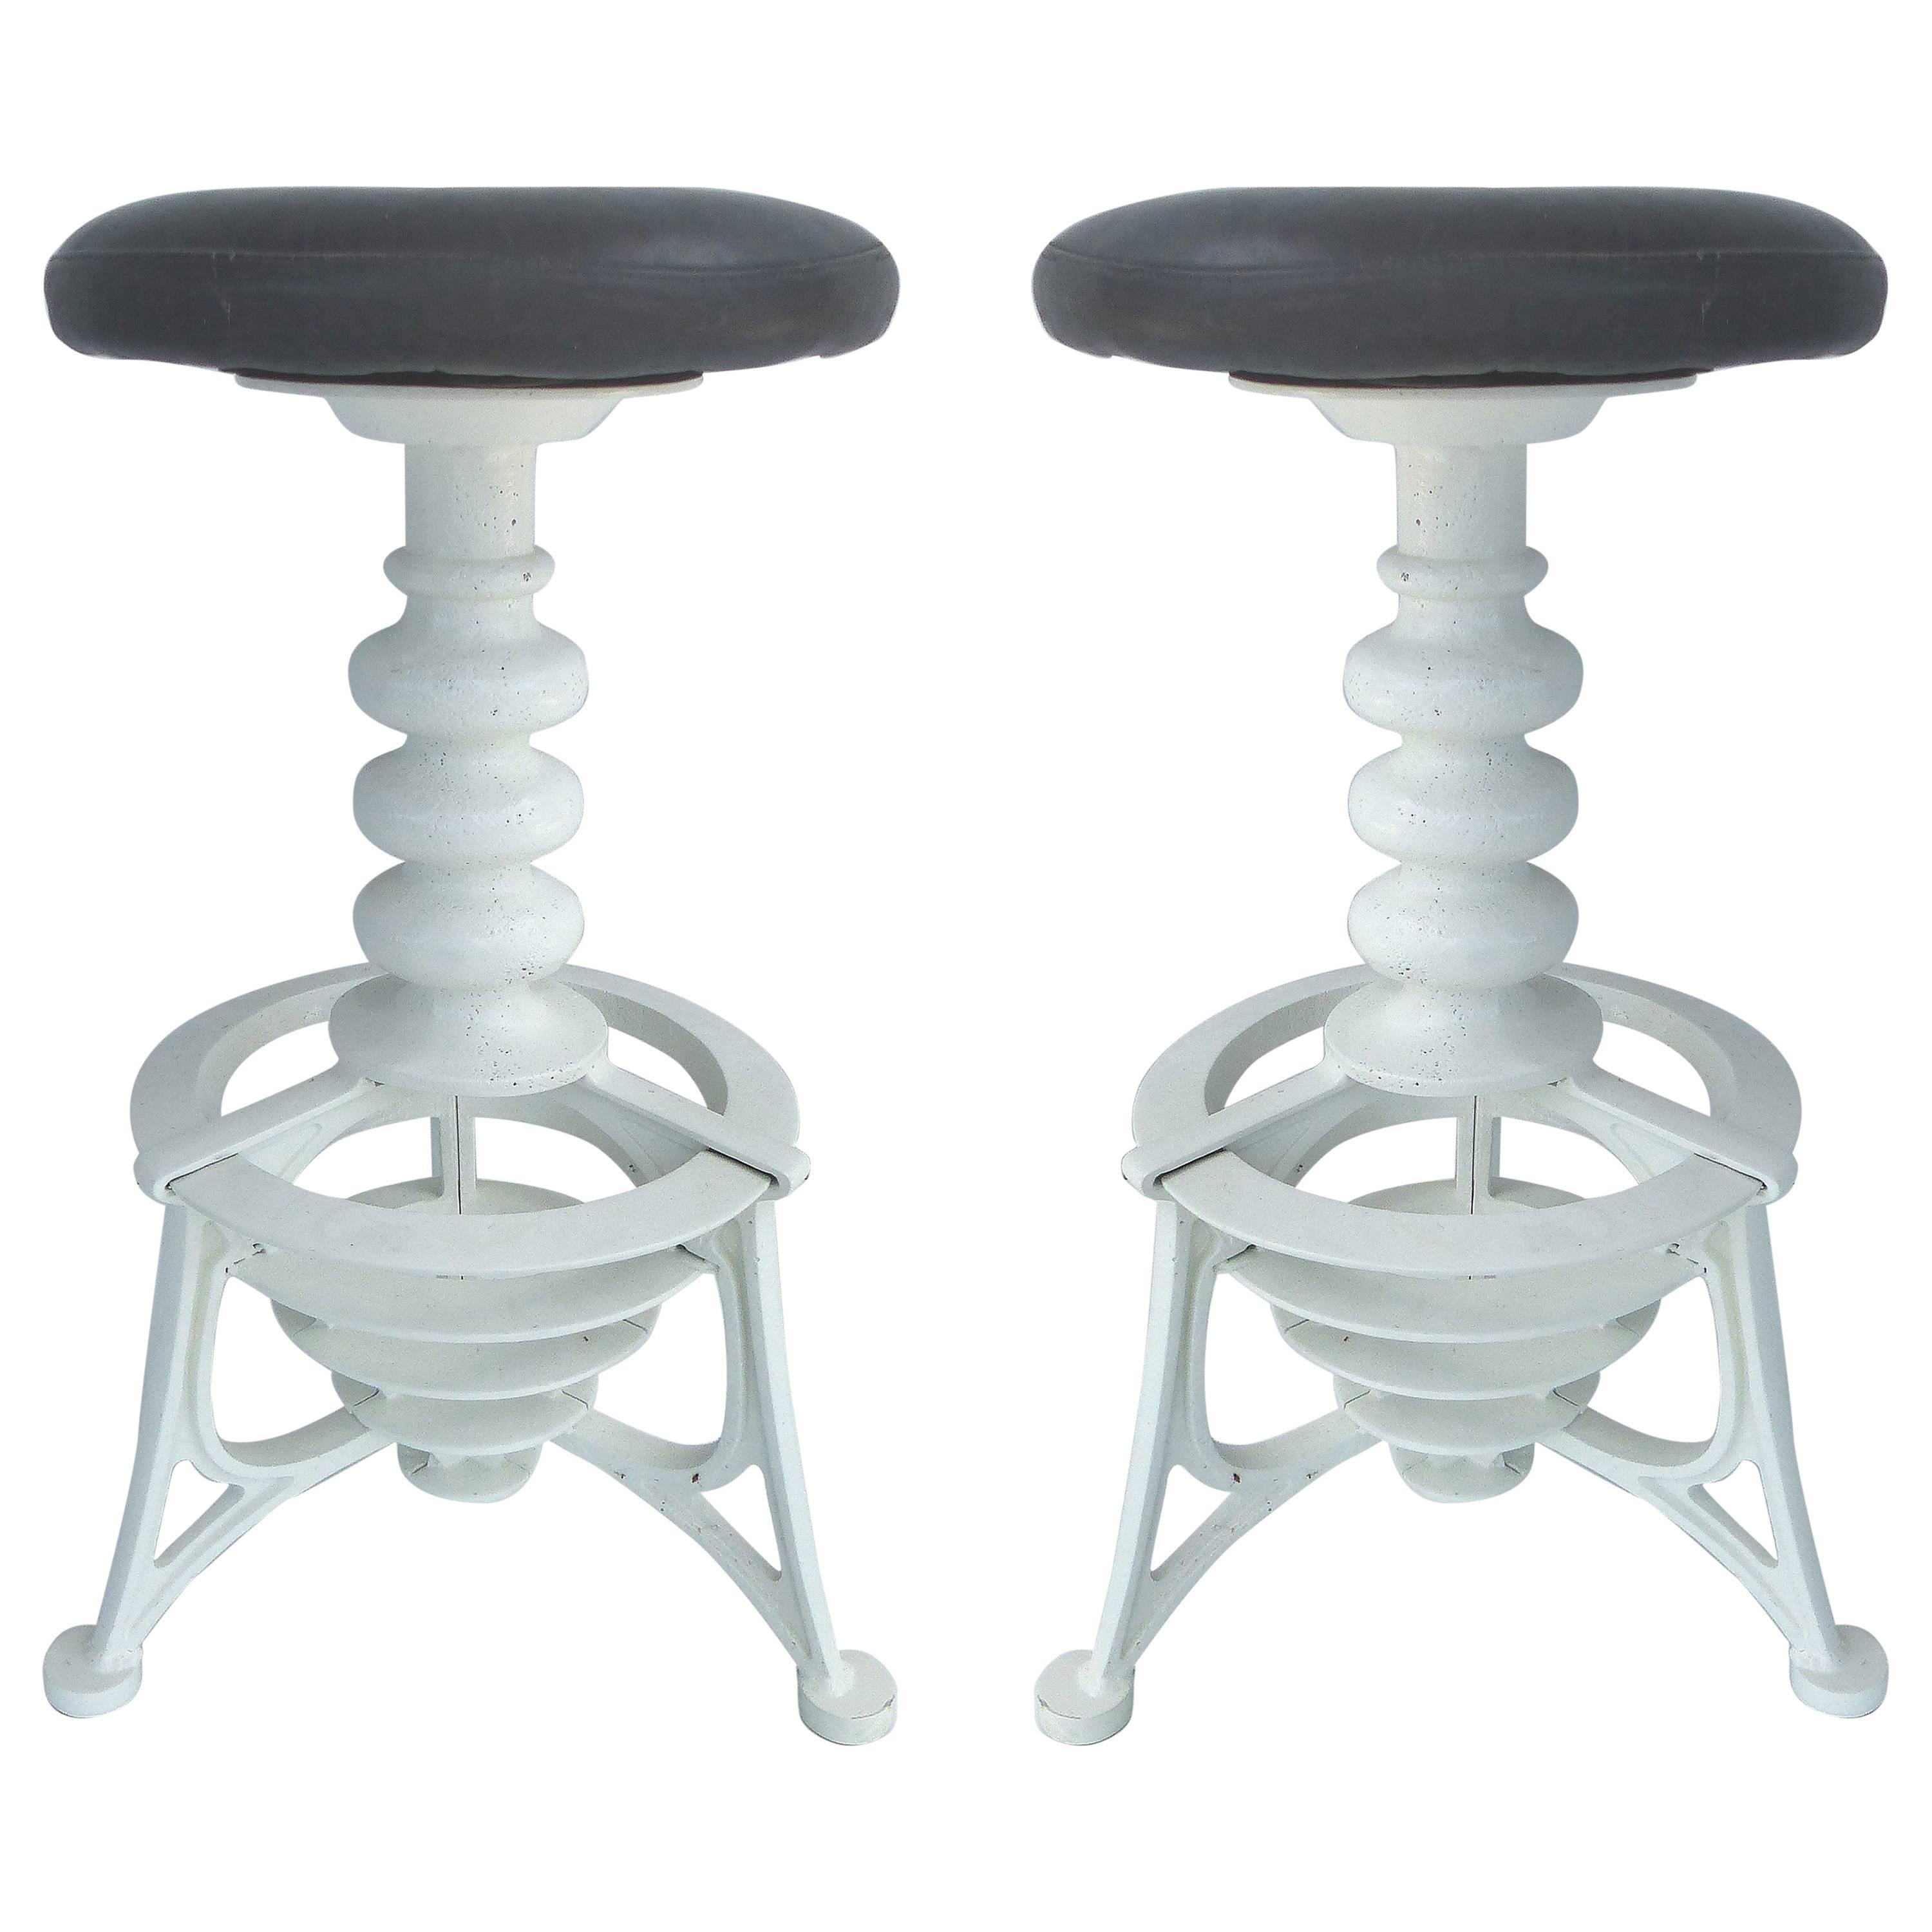 Turn of the Last Century Cast Iron Swivel Bar Stools with Leather Seats, Pair